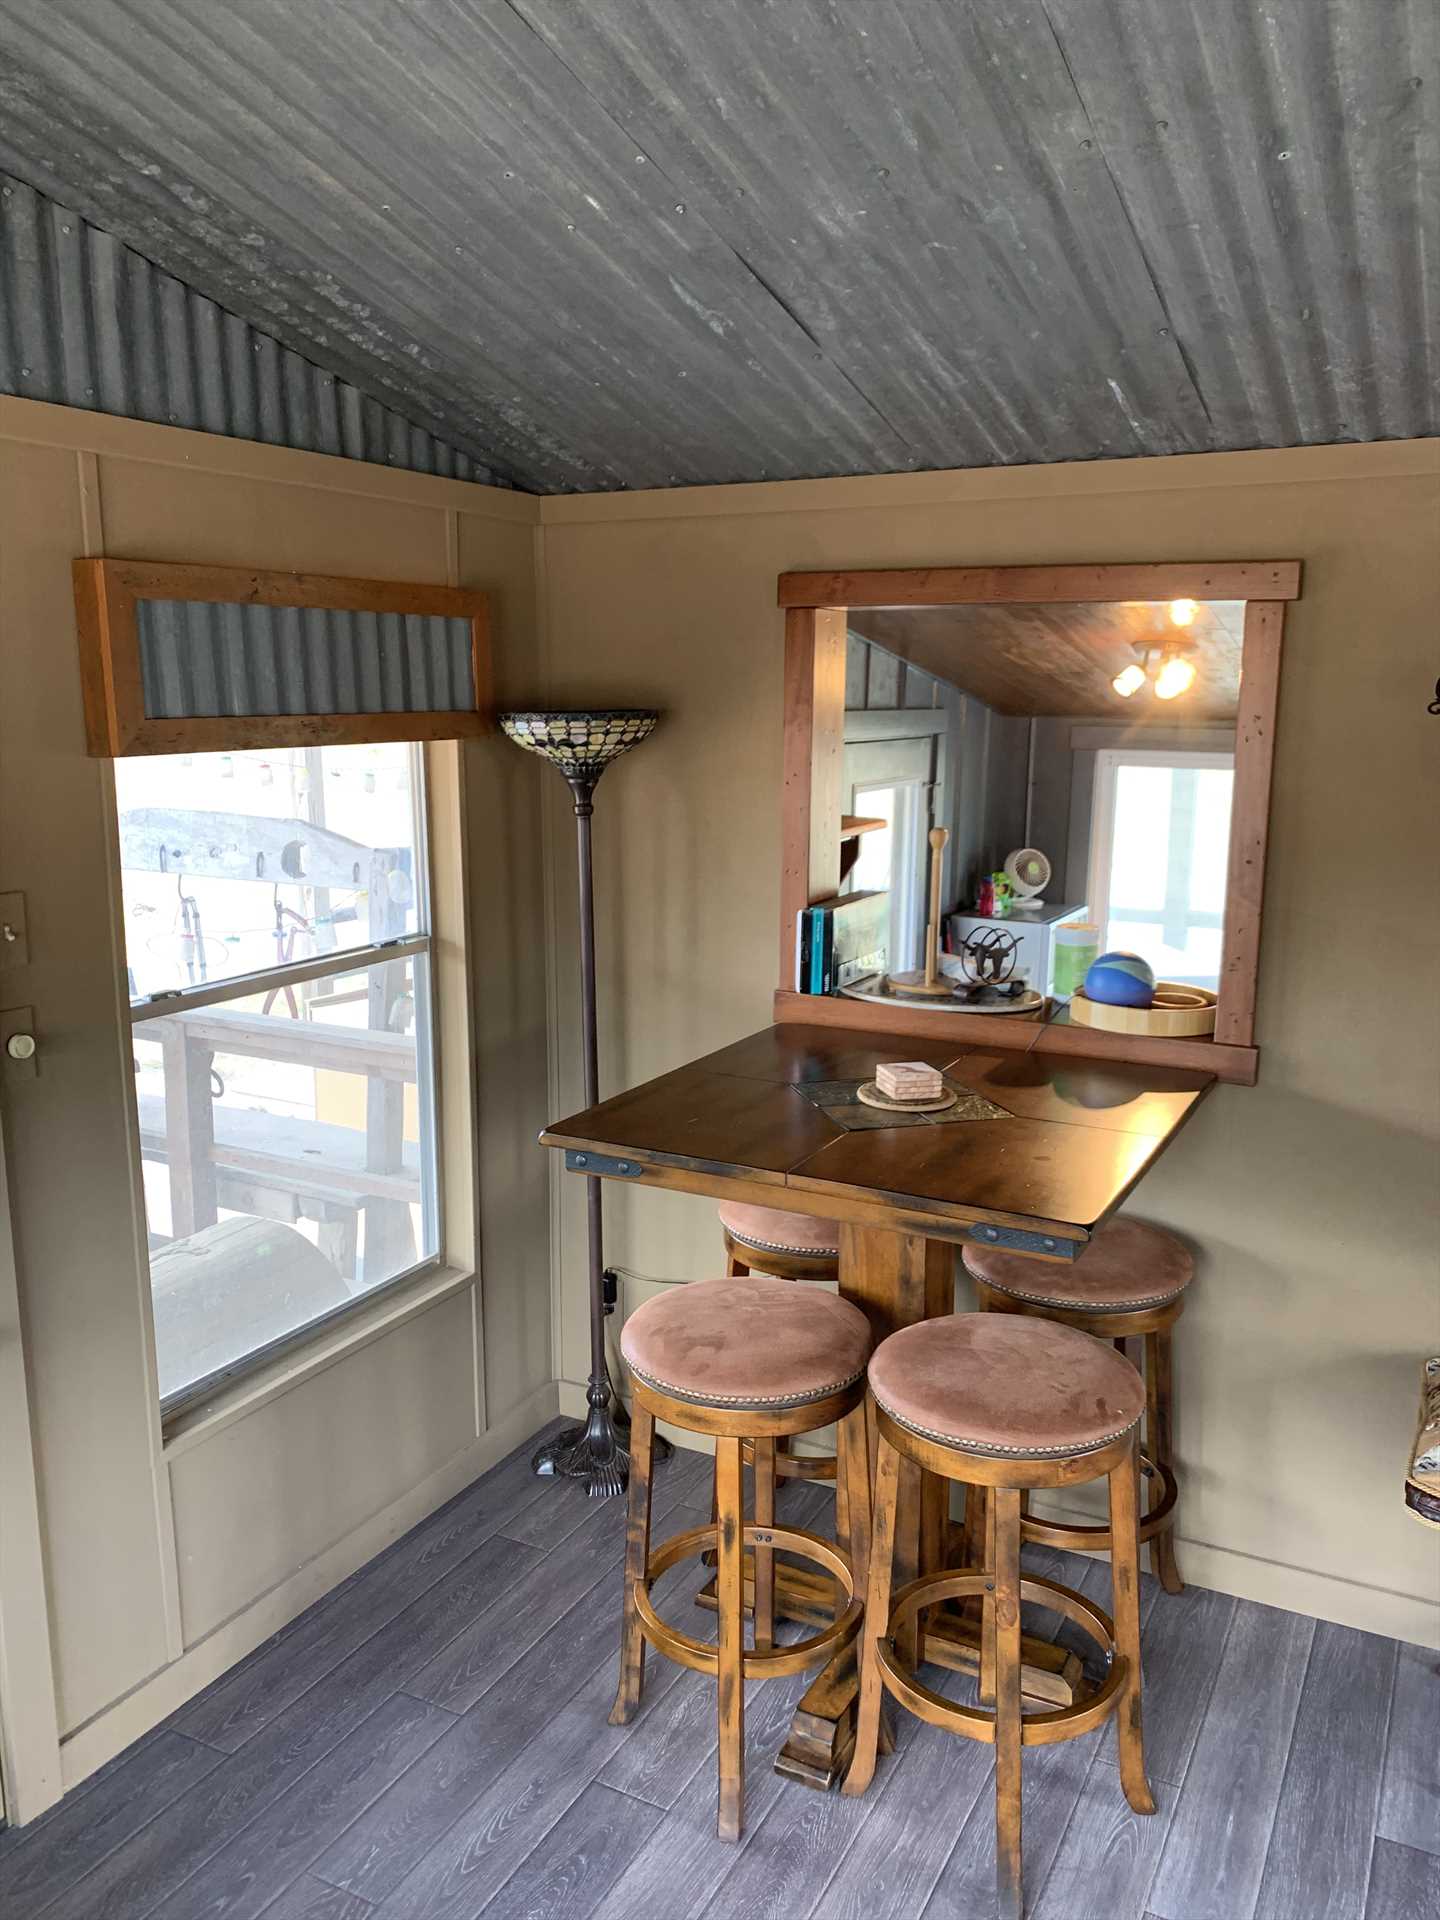                                                 Need room for more than two guests? Ask us about other cabin rentals available at Tabasco Ranch!